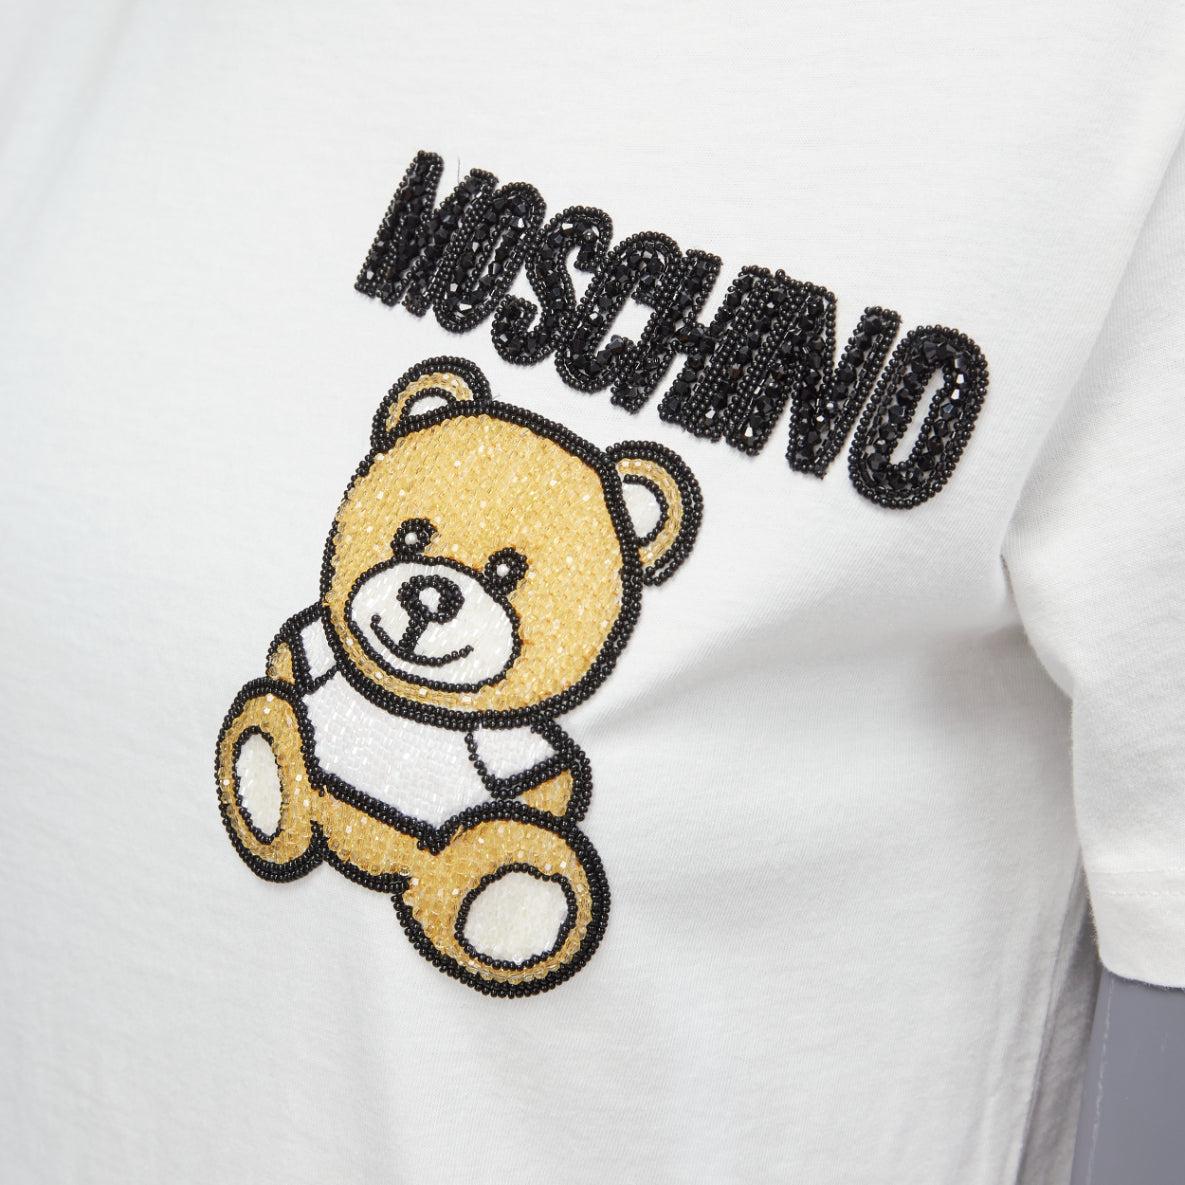 MOSCHINO white black brown beaded embroidery bear short sleeve tshirt IT38 XS
Reference: KYCG/A00055
Brand: Moschino
Material: Cotton
Color: White, Black
Pattern: Logomania
Closure: Pullover
Extra Details: Beaded teddy at right chest.
Made in: